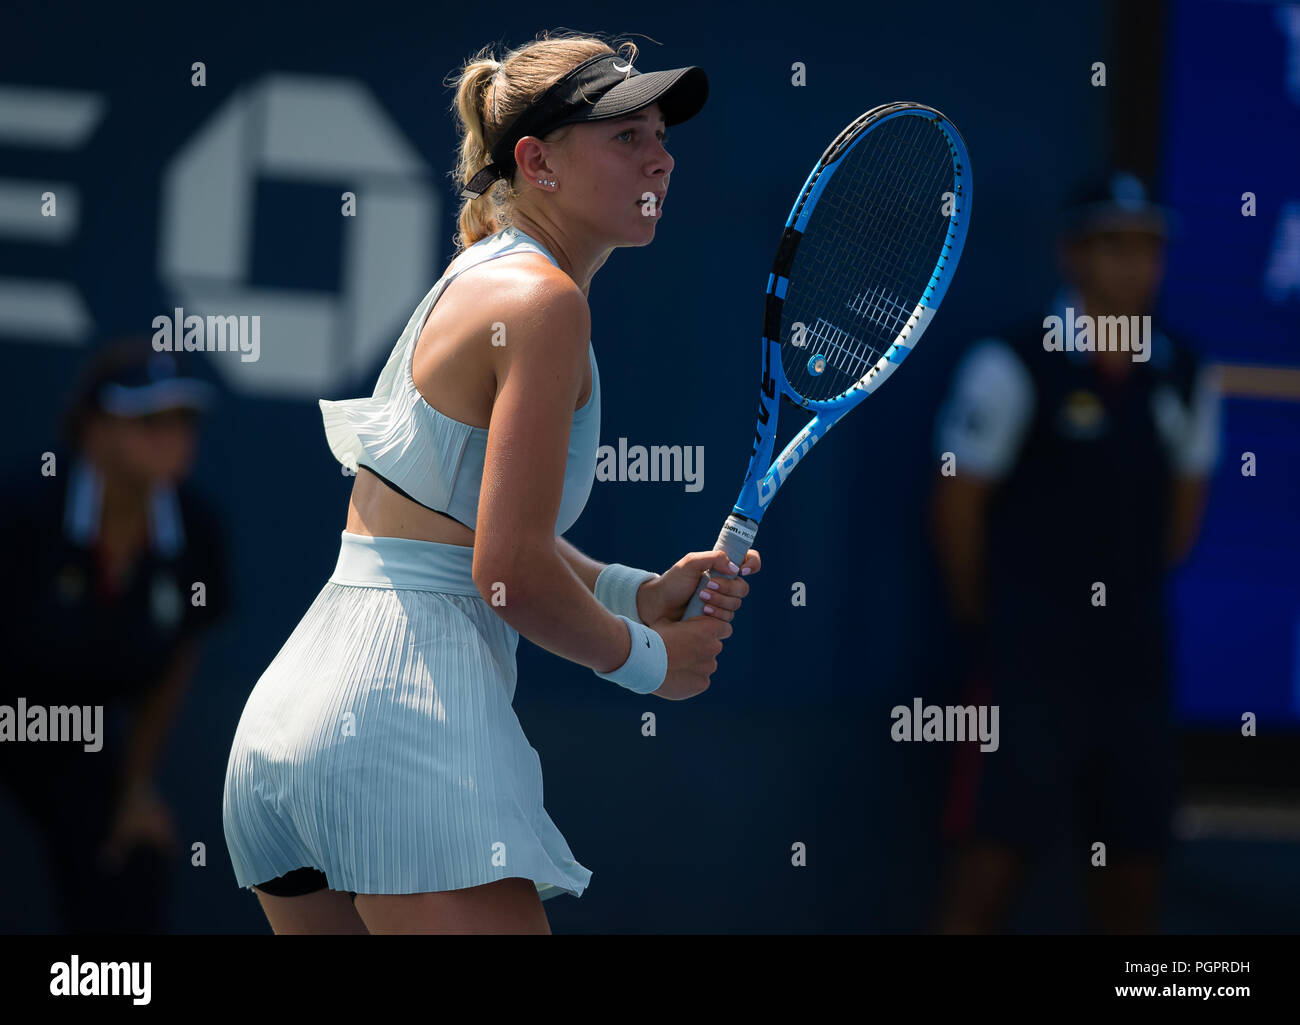 New York, USA. 28th August 2018. Amanda Anisimova of the United States in  action during the first round of the 2018 US Open Grand Slam tennis  tournament. New York, USA. August 28th